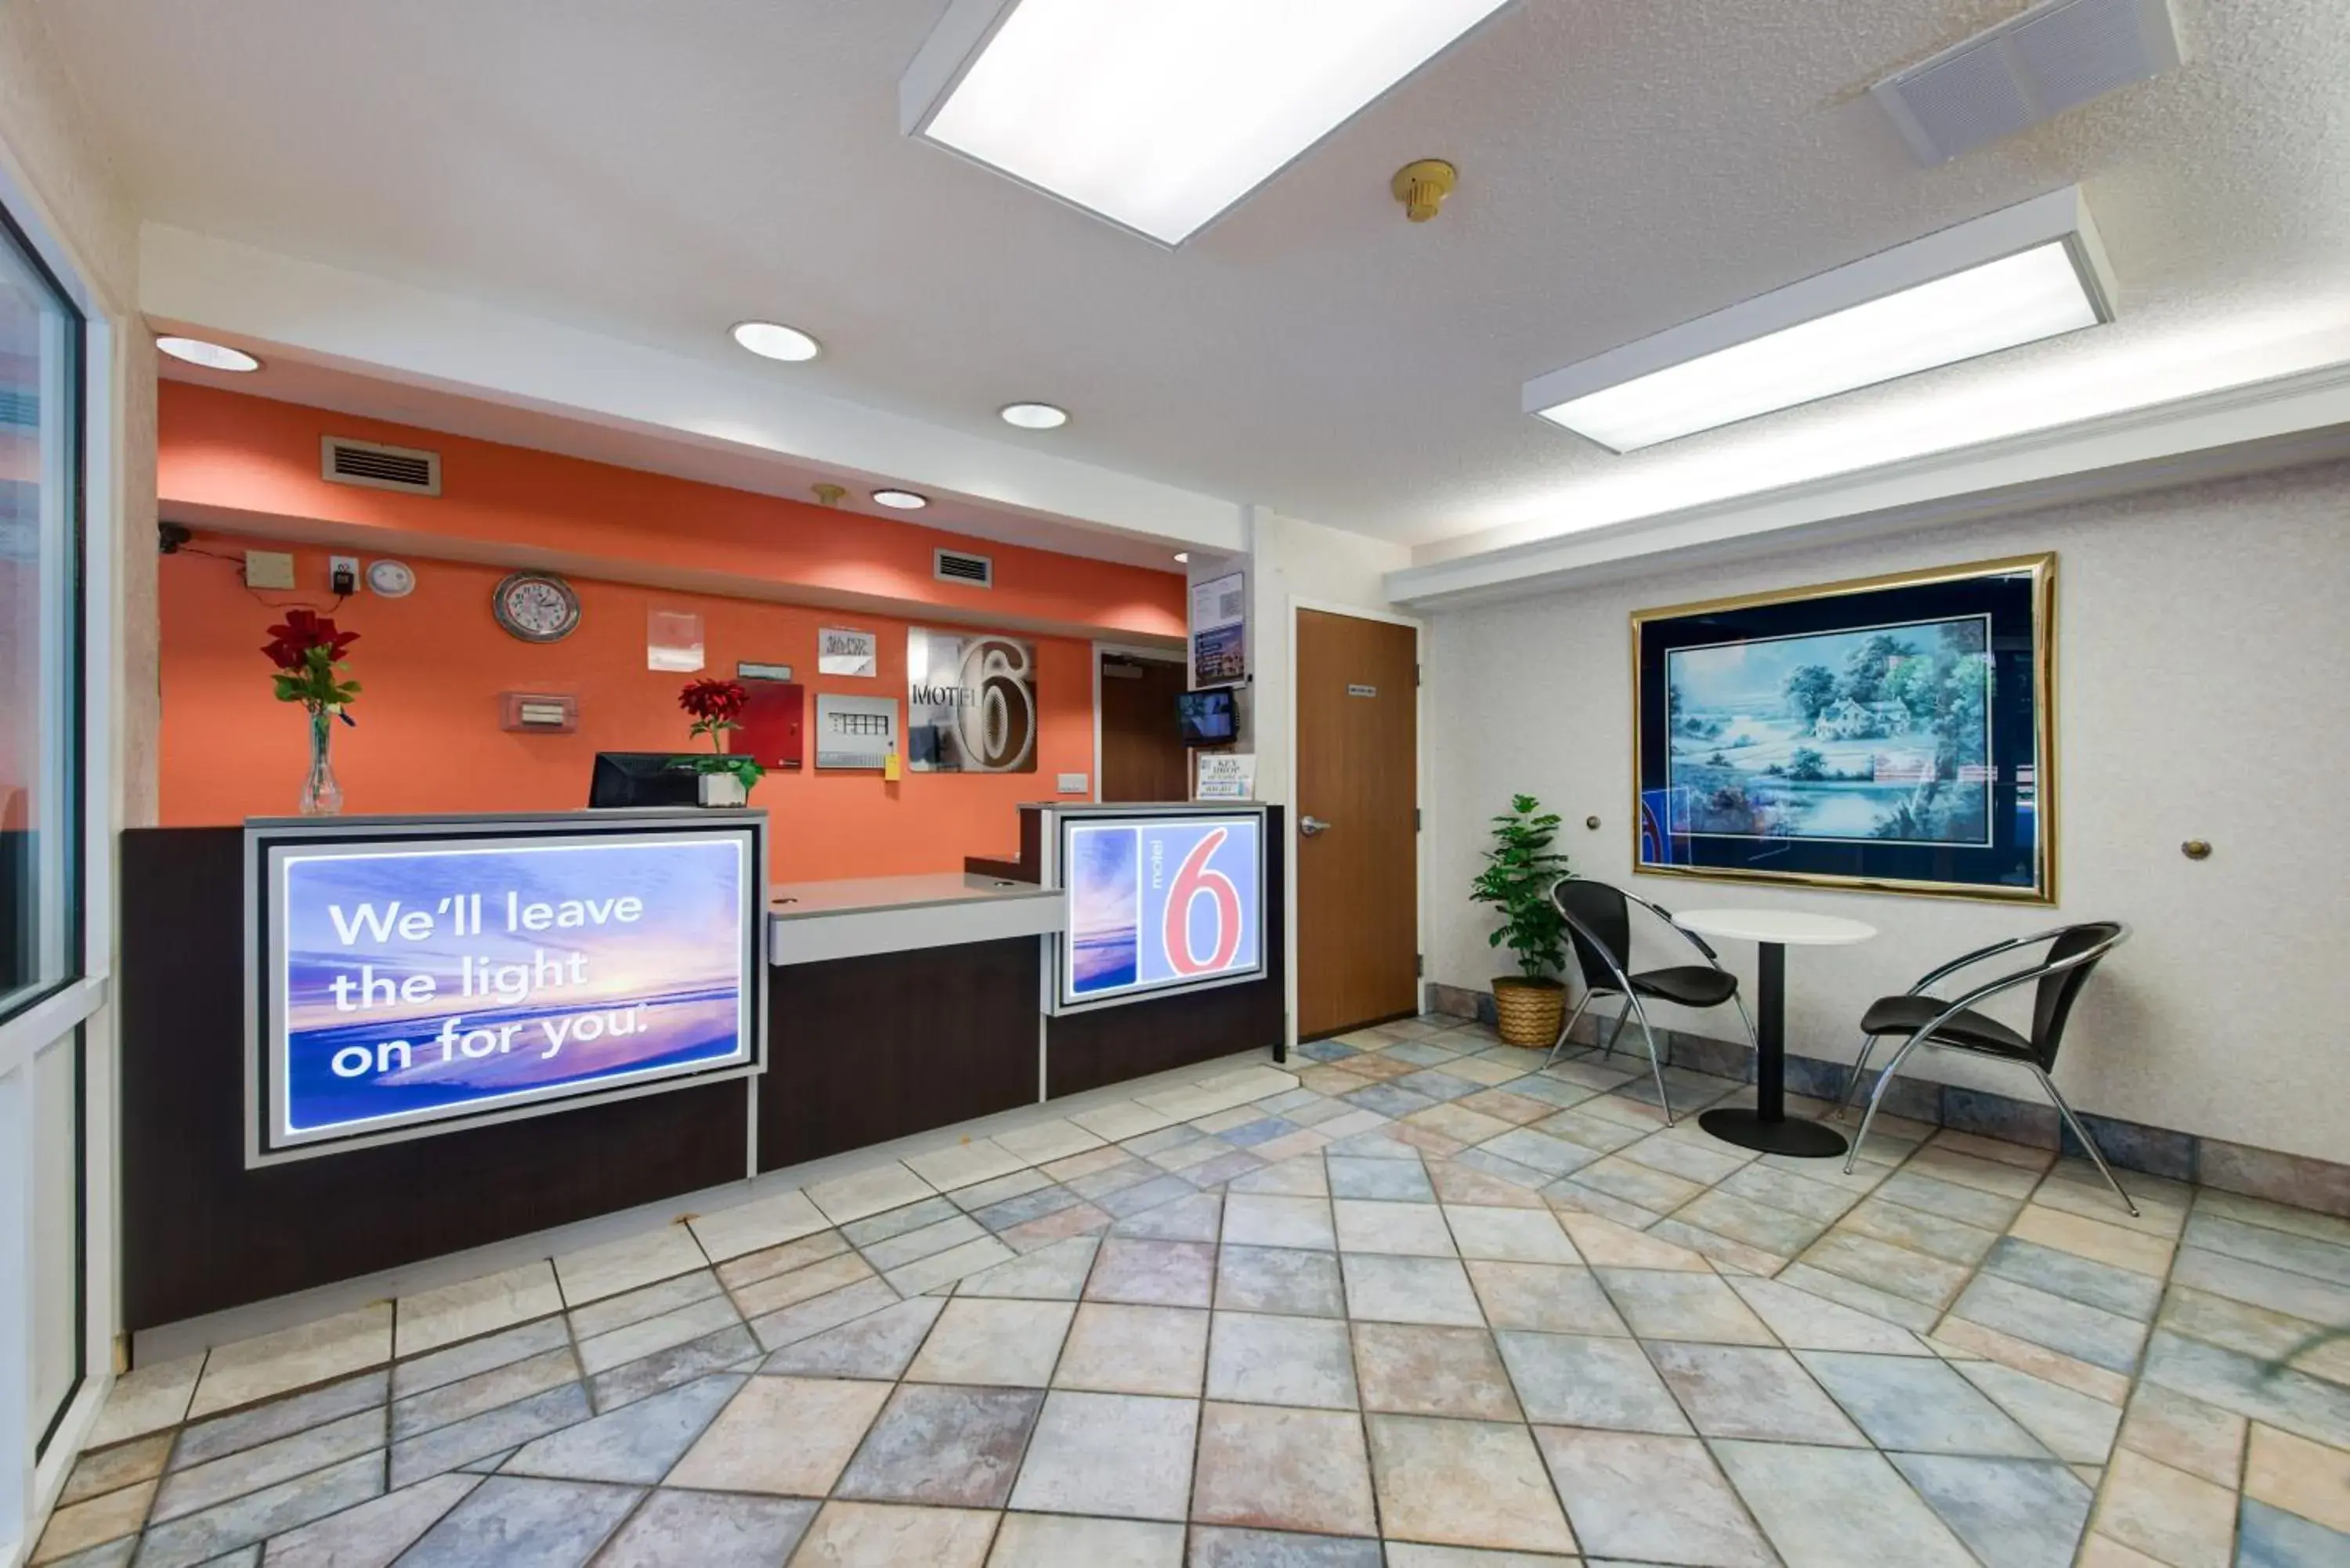 Lobby or reception in Motel 6-Statesville, NC